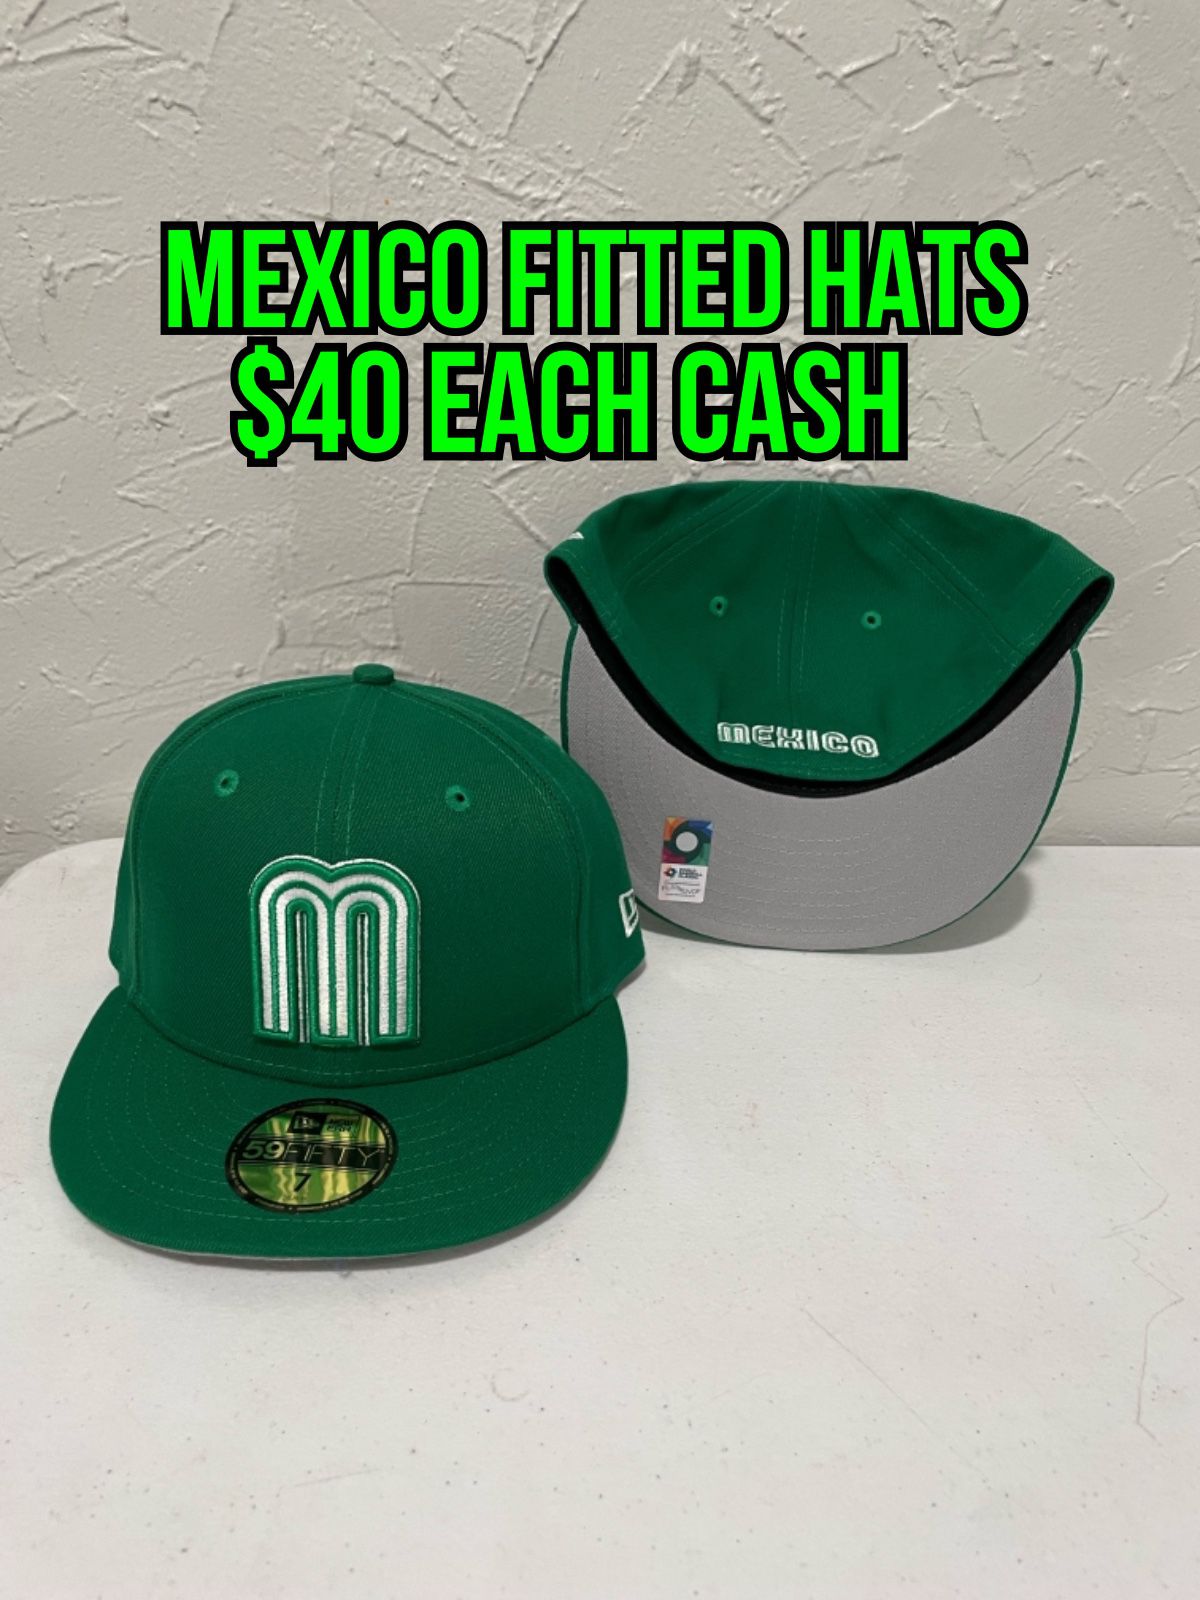 WBC World Baseball Classic Team Mexico Green 59fifty Fitted Hats Size 6  7/8, 7, 7 1/8, 7 1/4, 7 3/8, 7 1/2 And 7 3/4 for Sale in West Covina, CA -  OfferUp